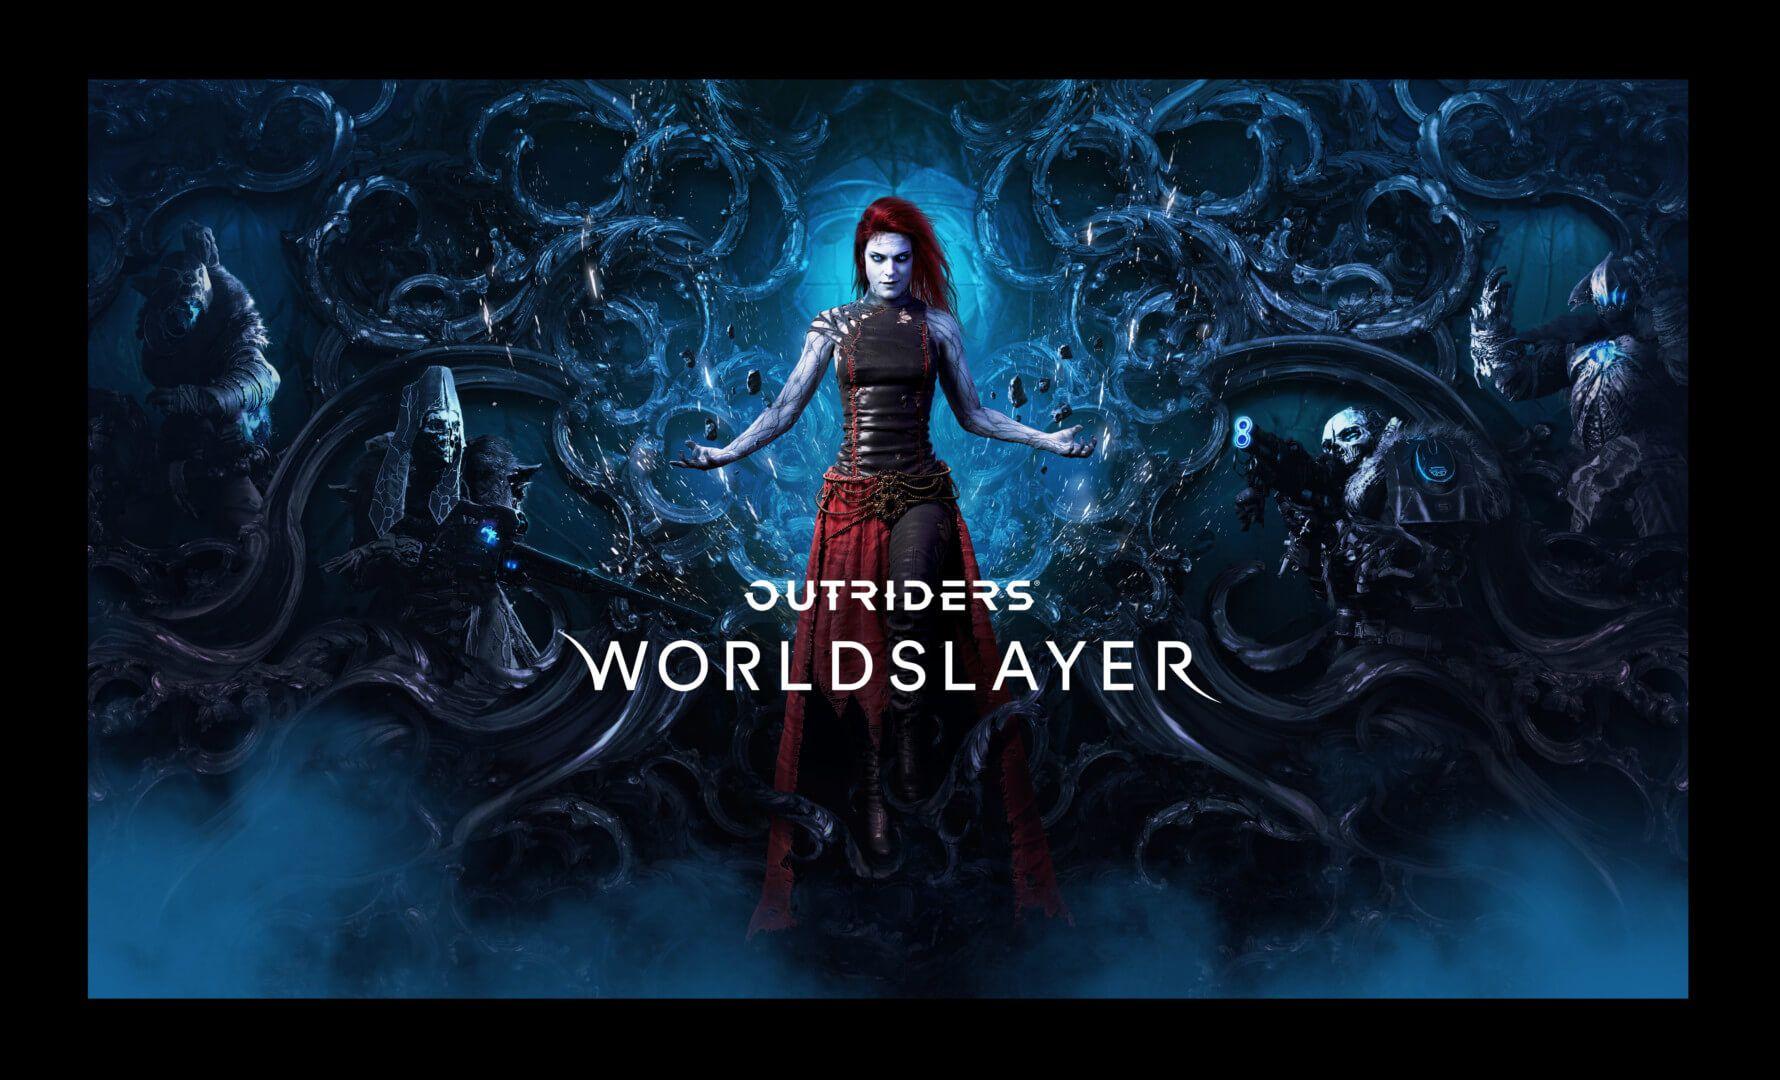 OUTRIDERS WORLDSLAYER